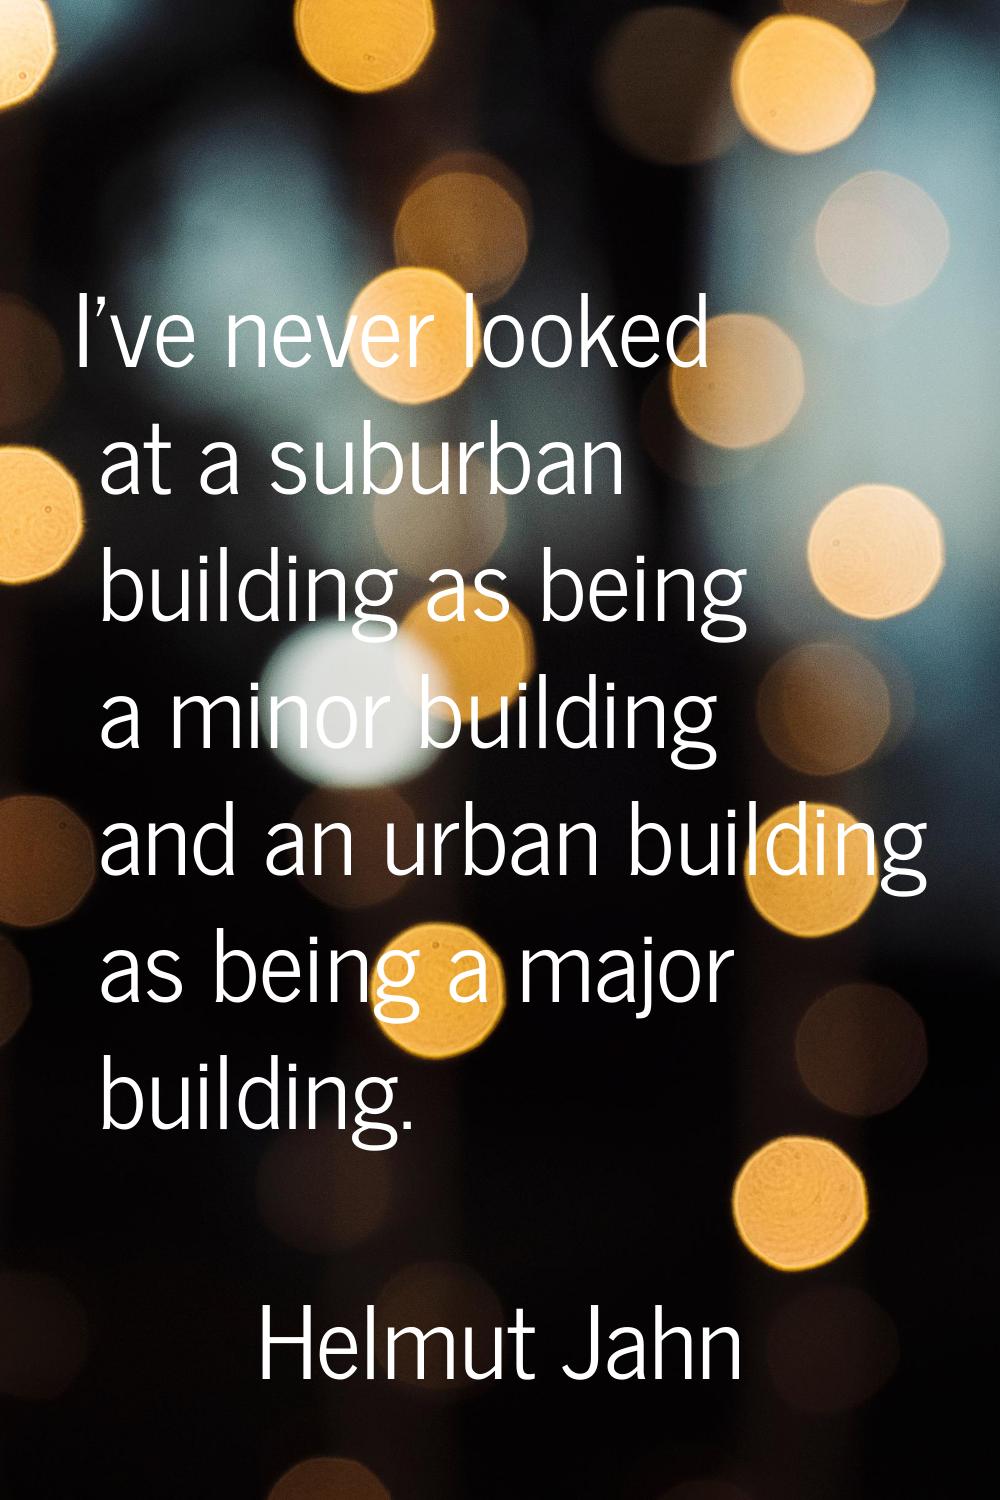 I've never looked at a suburban building as being a minor building and an urban building as being a